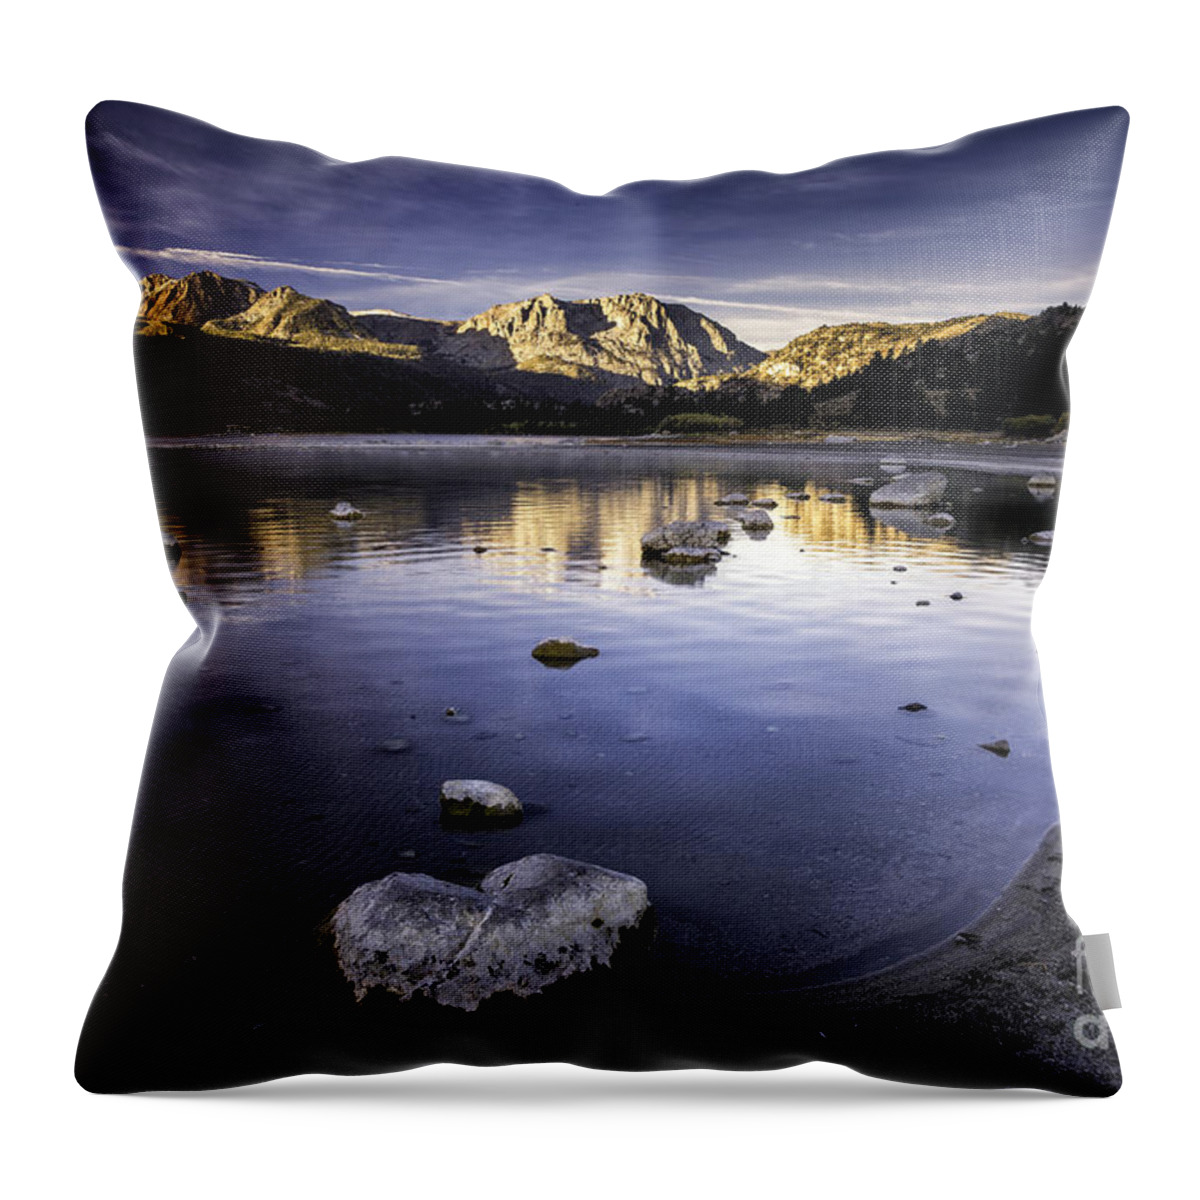 California Throw Pillow featuring the photograph June Lake Sunrise by Timothy Hacker